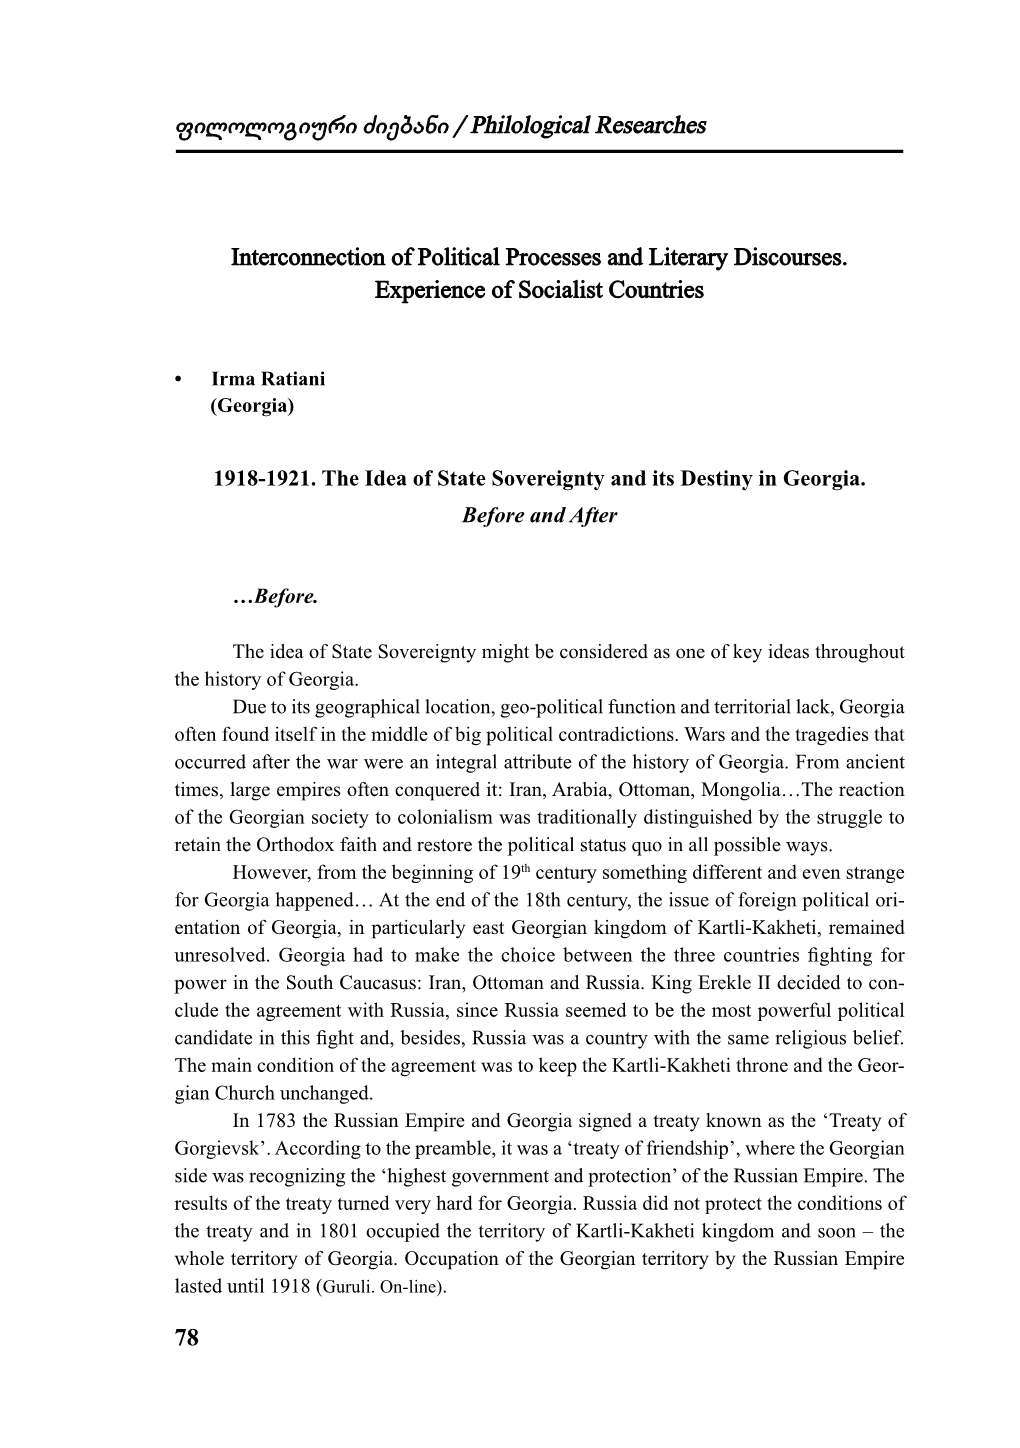 78 Interconnection of Political Processes and Literary Discourses